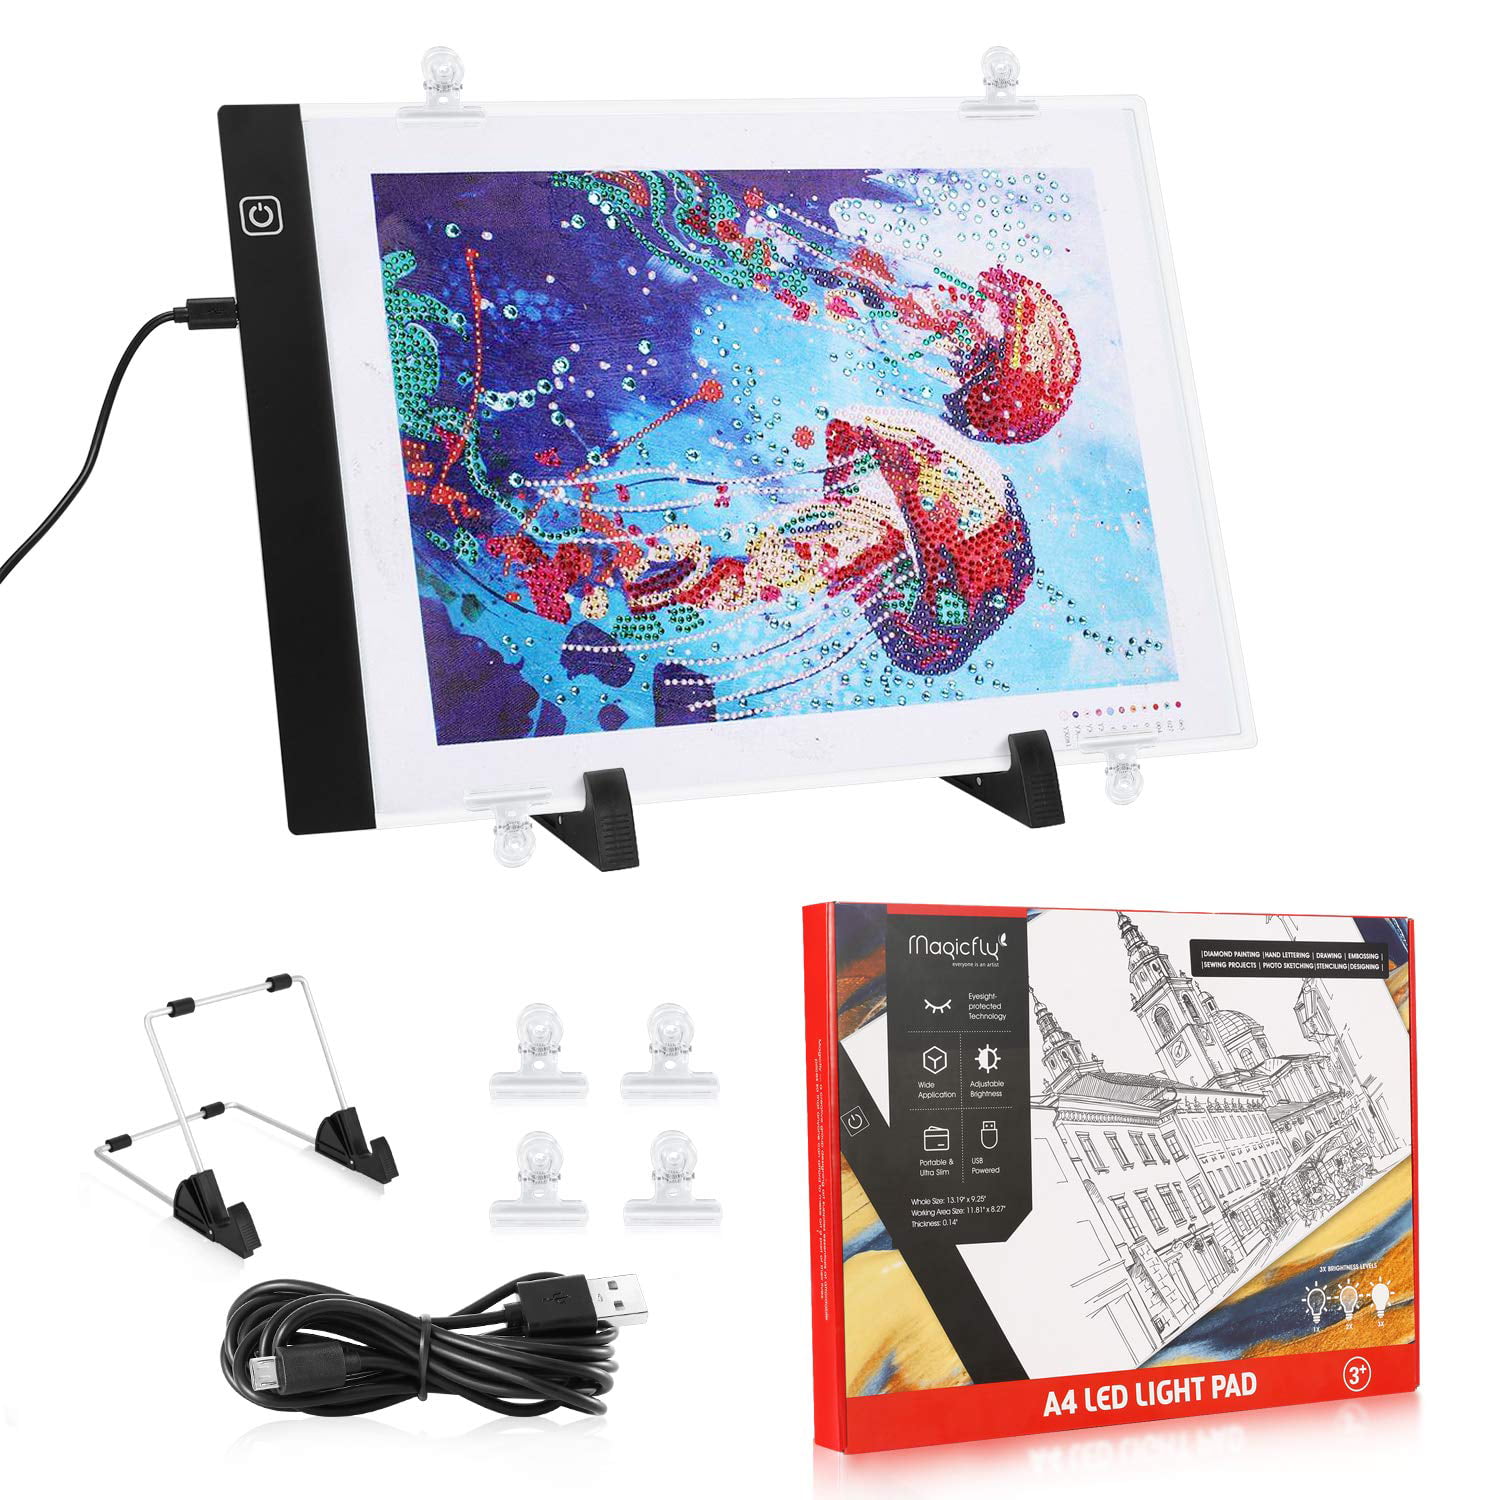 X-ray Viewing Brightness Adjustable Editing Negatives Dimming LED Tracing Board A4 Light Box Drawing UnityStar Portable LED Light Pad A4 Diamond Painting Accessories for Sketching Stenciling